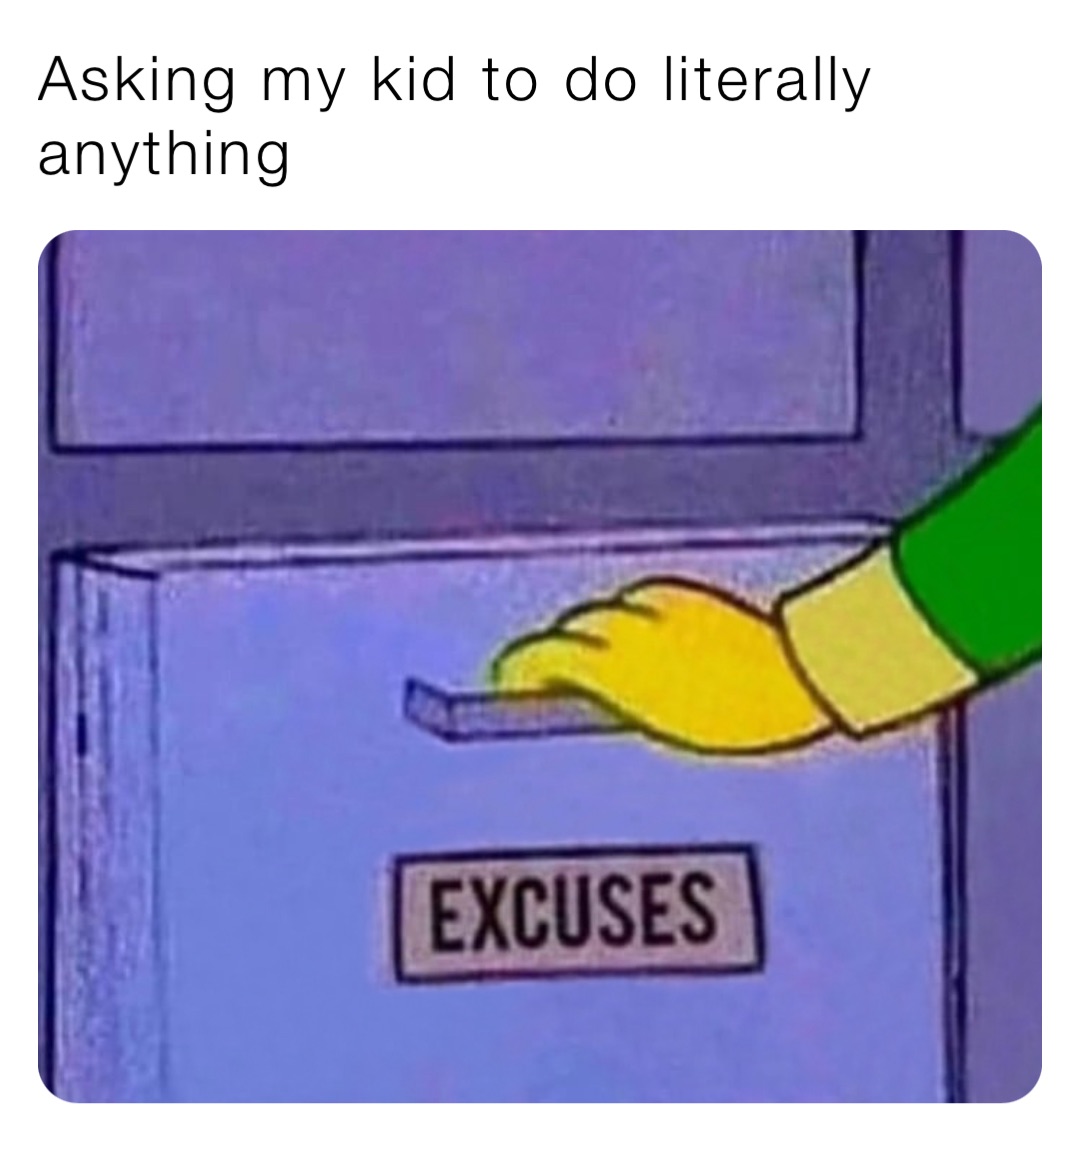 Asking my kid to do literally anything